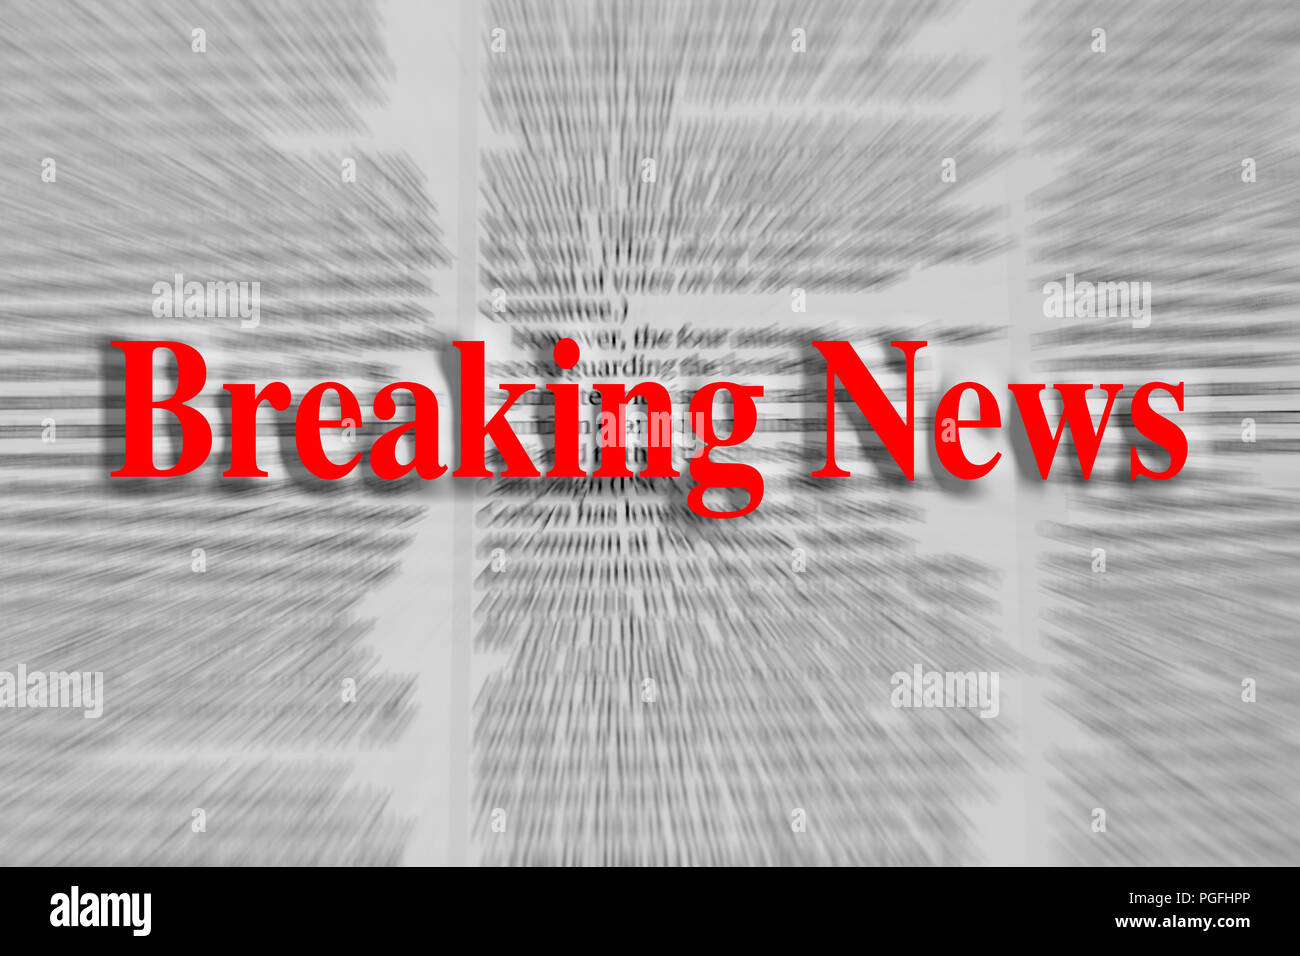 Breaking news written in red with a newspaper article blurred in the background Stock Photo